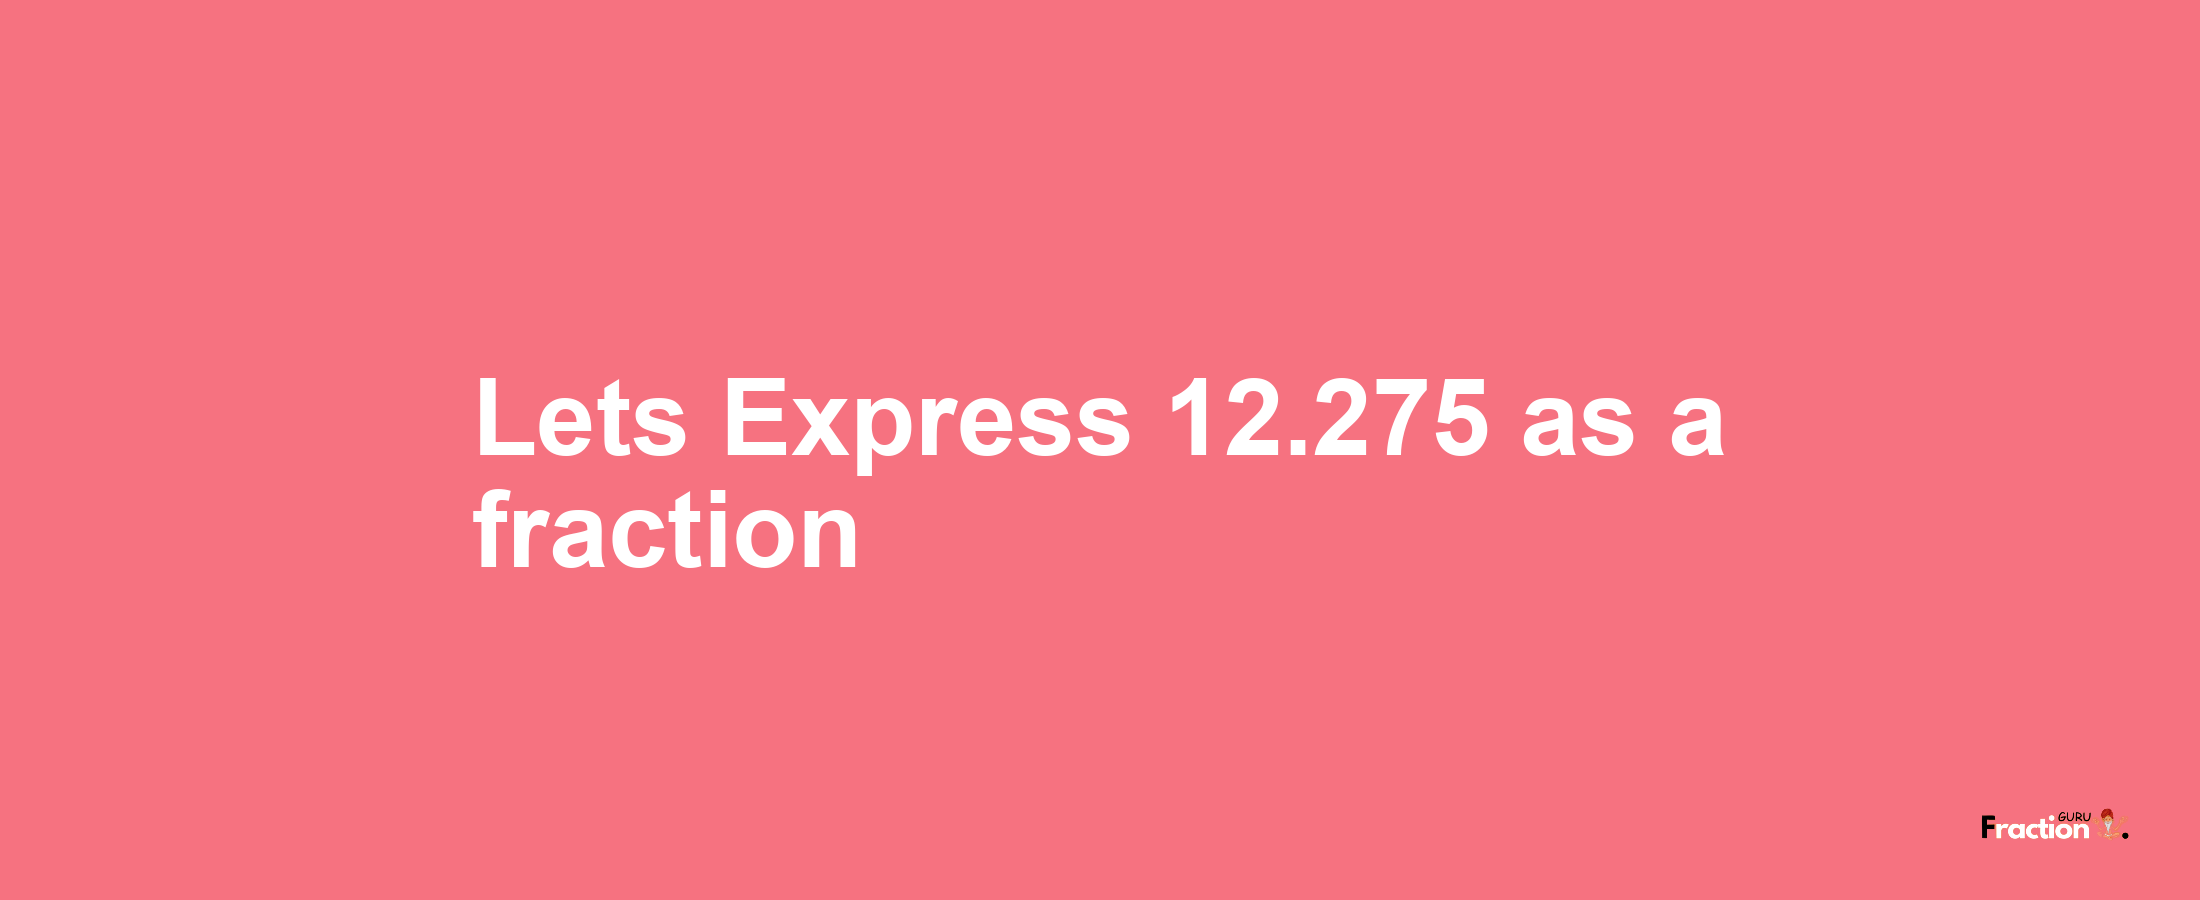 Lets Express 12.275 as afraction